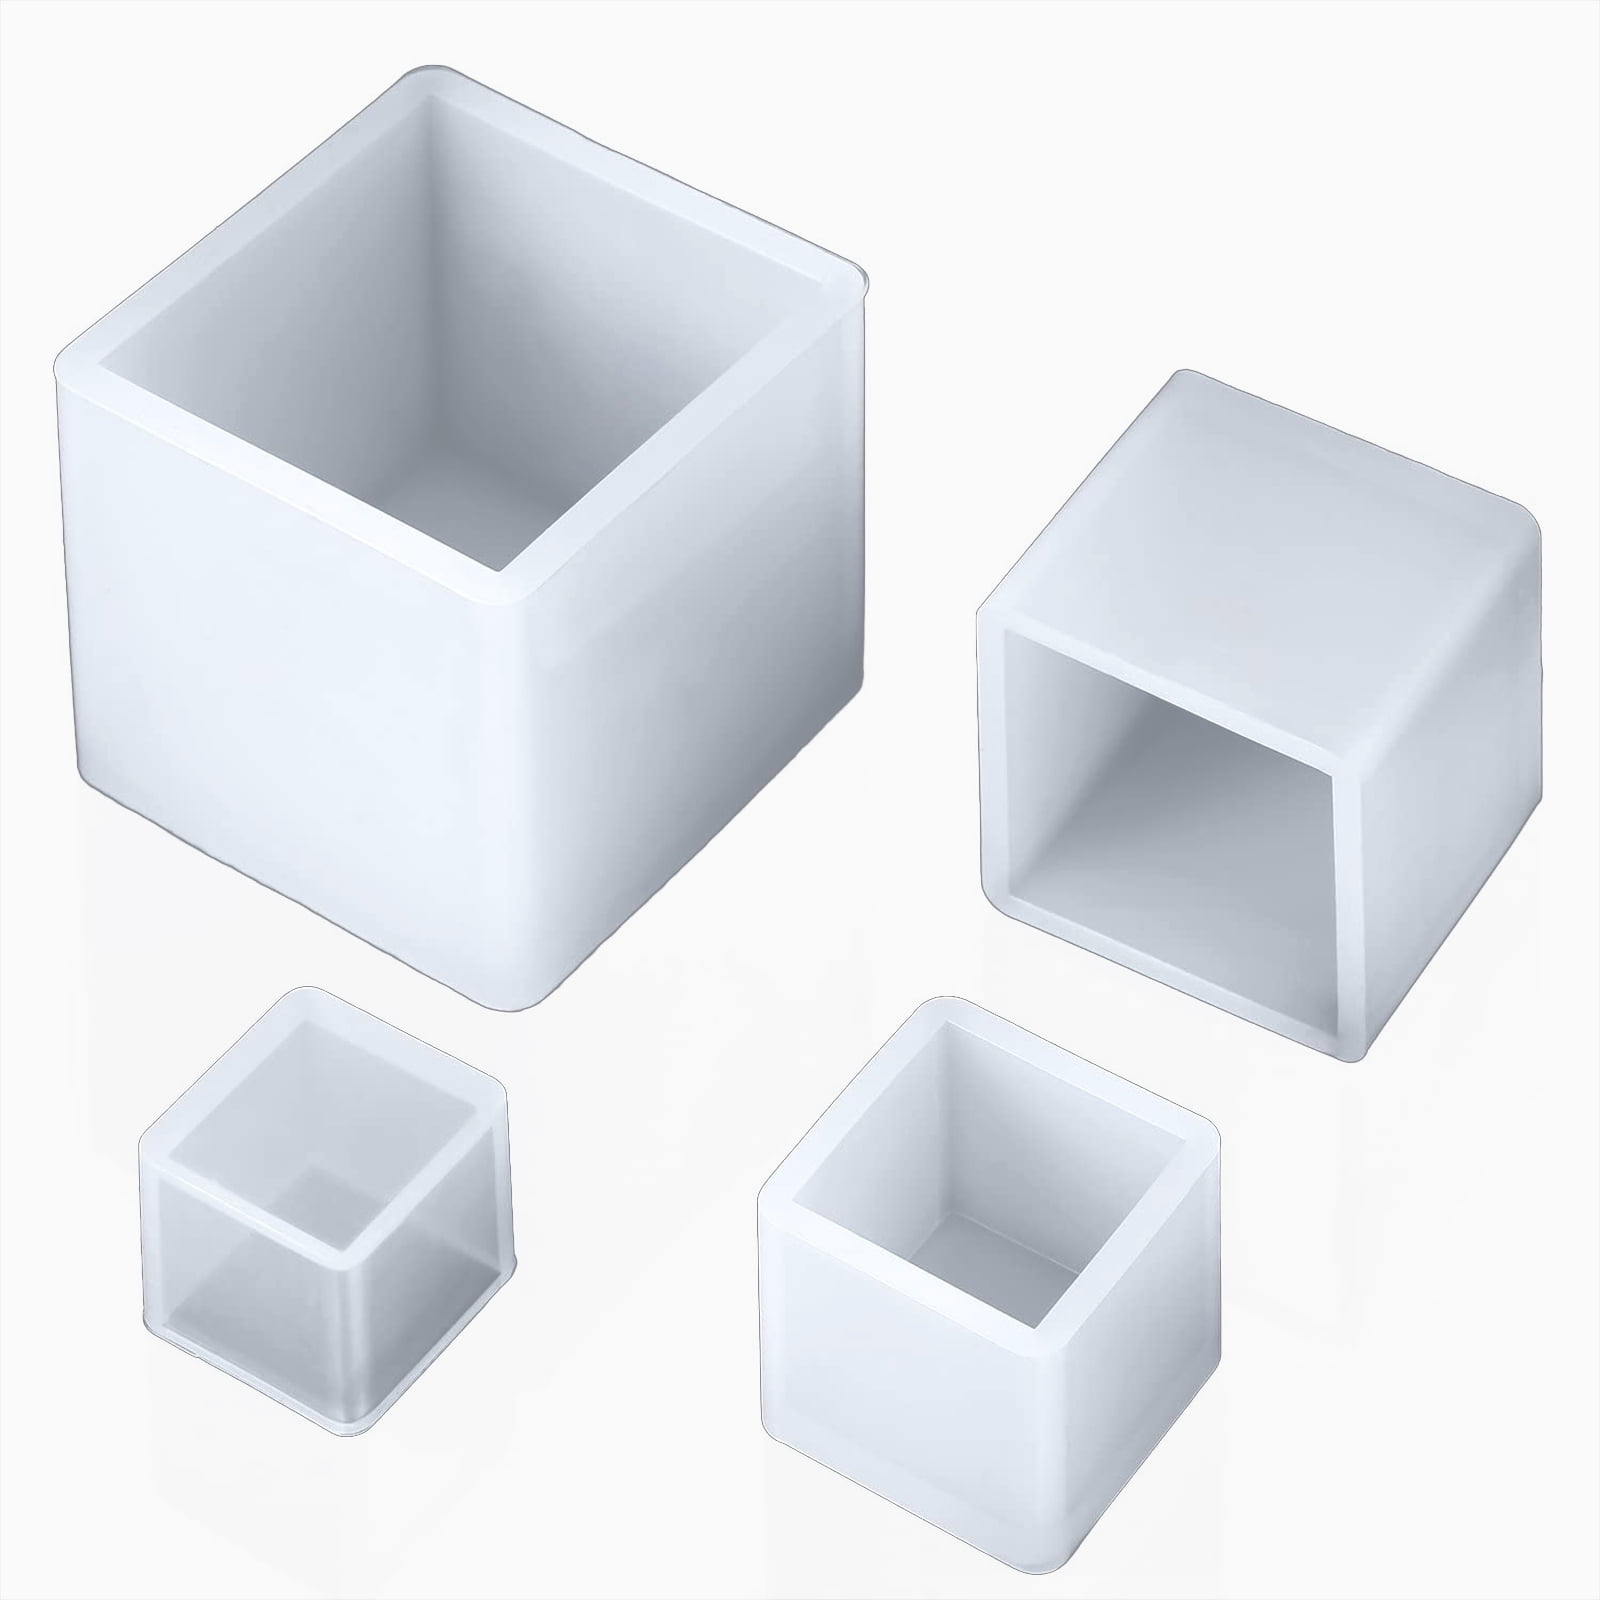 Hukai 10cm/4 Super Large Cube Square Silicone Mold Resin Casting Jewelry  Making Tools,Can Be Applied to DIY Different Handiwork and Jewelry